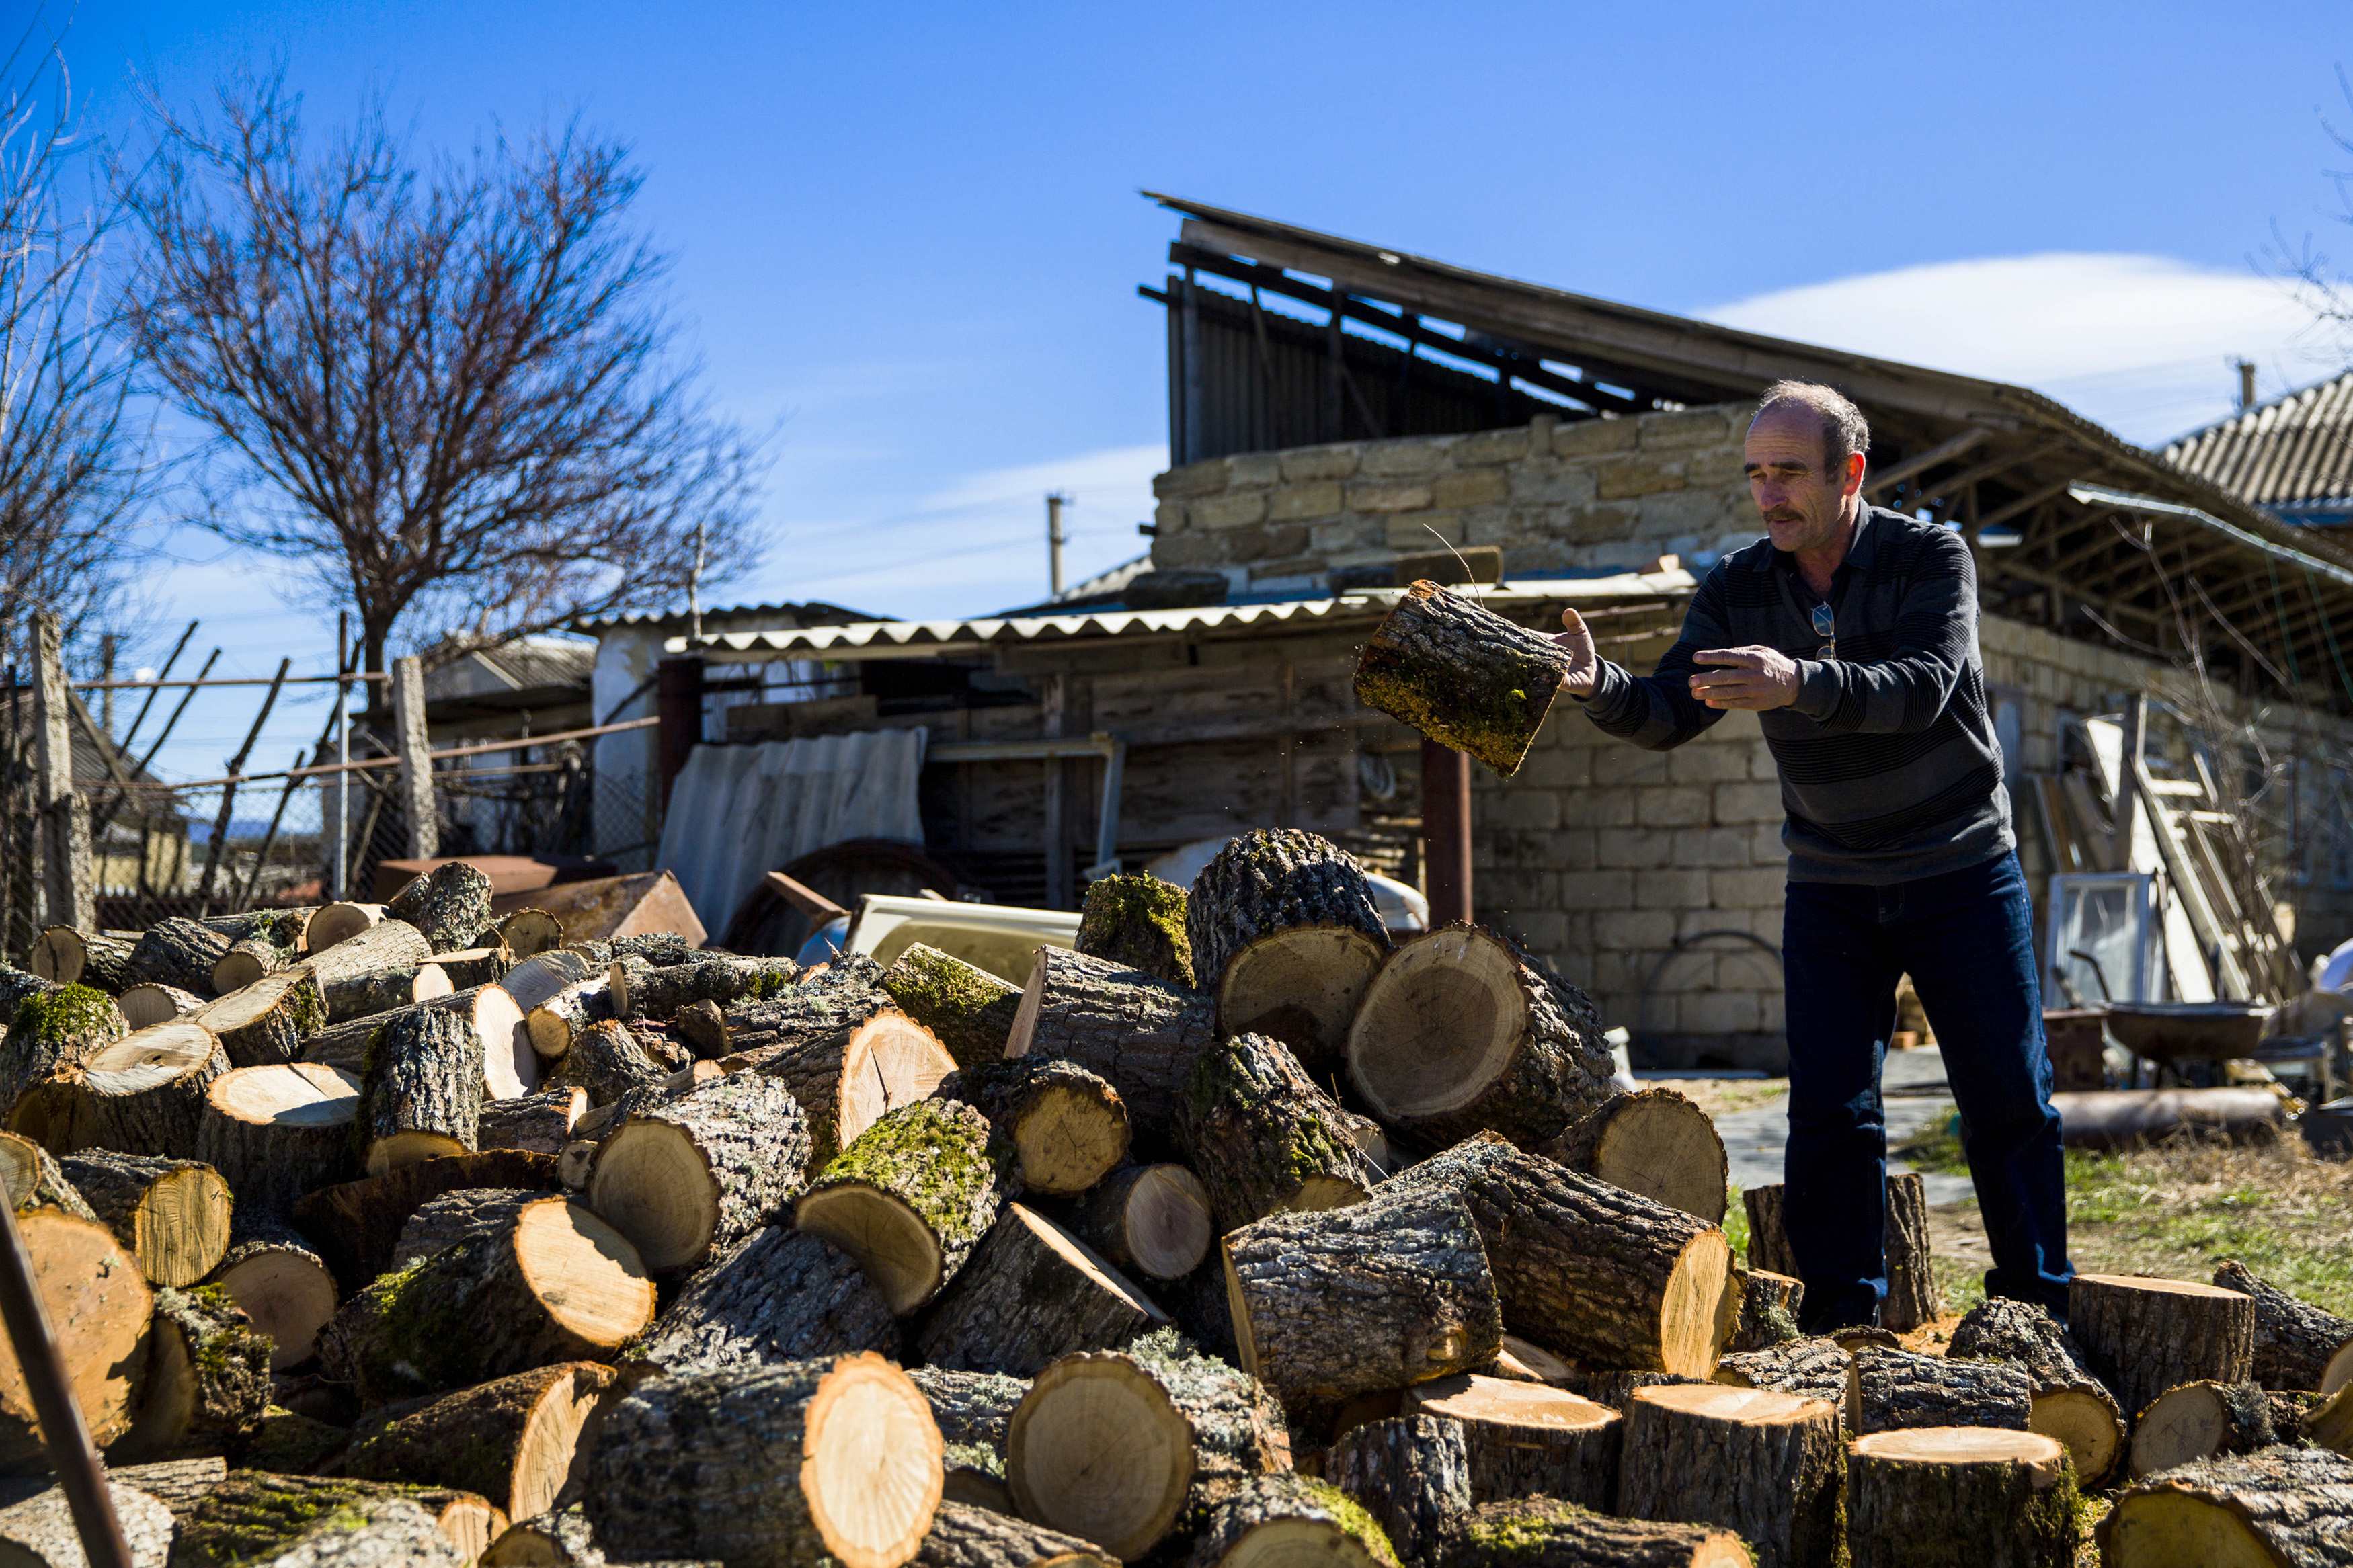 A Crimean Tartar piles up wood in his garden in Belogorsk near the Crimean capital of Simferopol March 17, 2014. Among the voices drowned out by victory celebrations across Crimea as it voted to leave Ukraine and join Russia were those of the Tatars, a mi